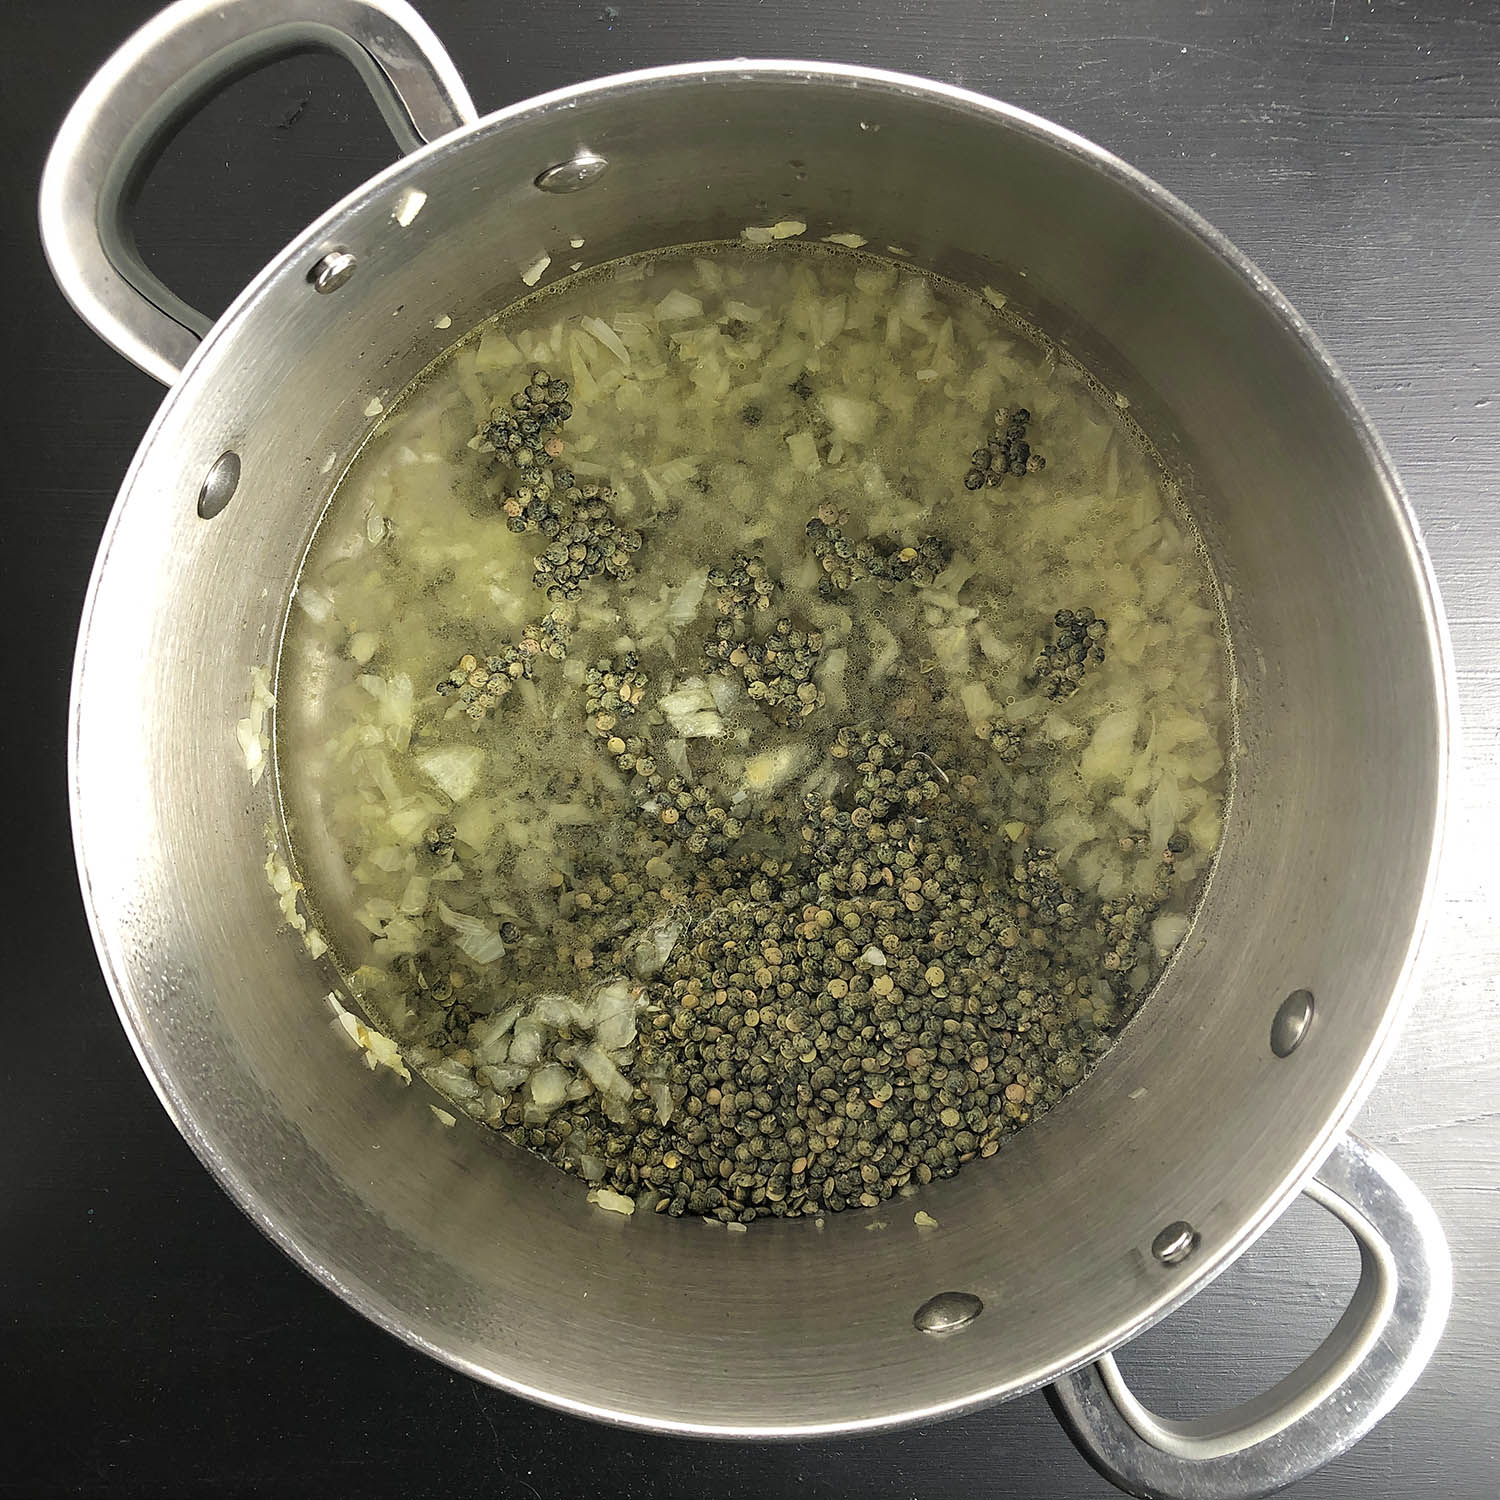 Making Lentil, Lemon, and Dill Soup. Stir in the lentils and water. Bring to a boil and then simmer.